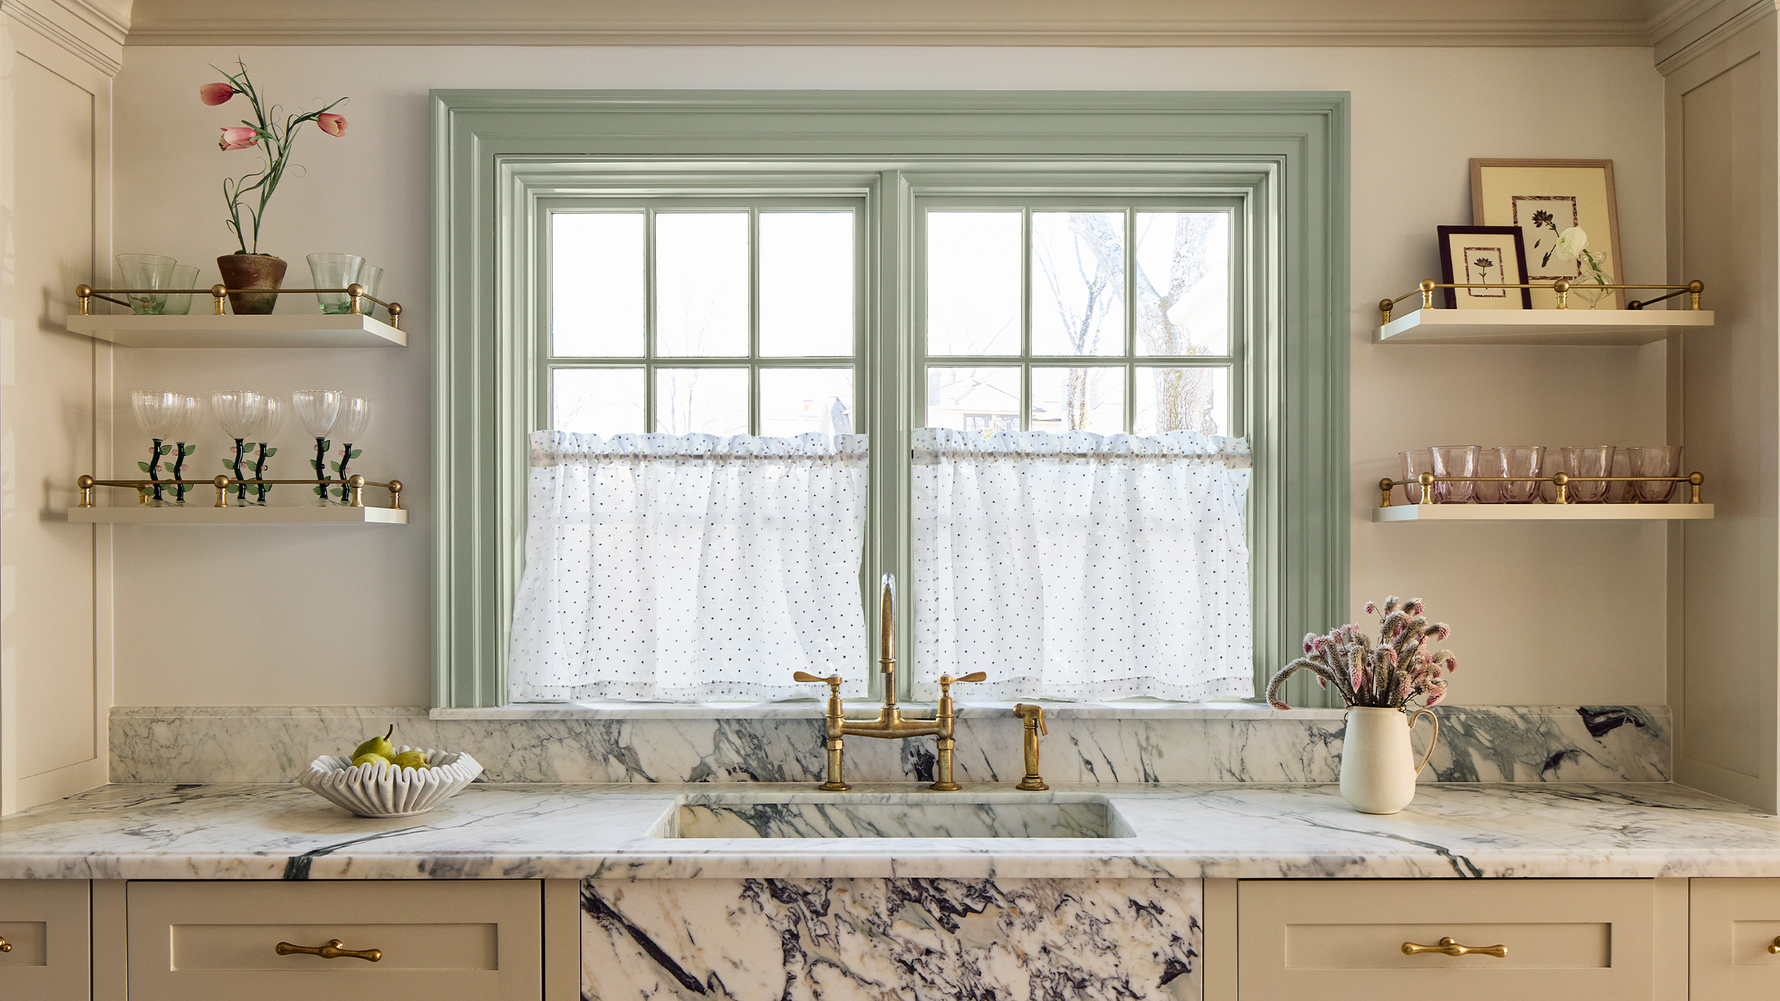 sheer white cafe curtain with embroidered polka dots hung in front of an illuminated window with sage green trim behind a sink in a kitchen with multicolored marble counter and shelves on the wall with glasses and flowers on them